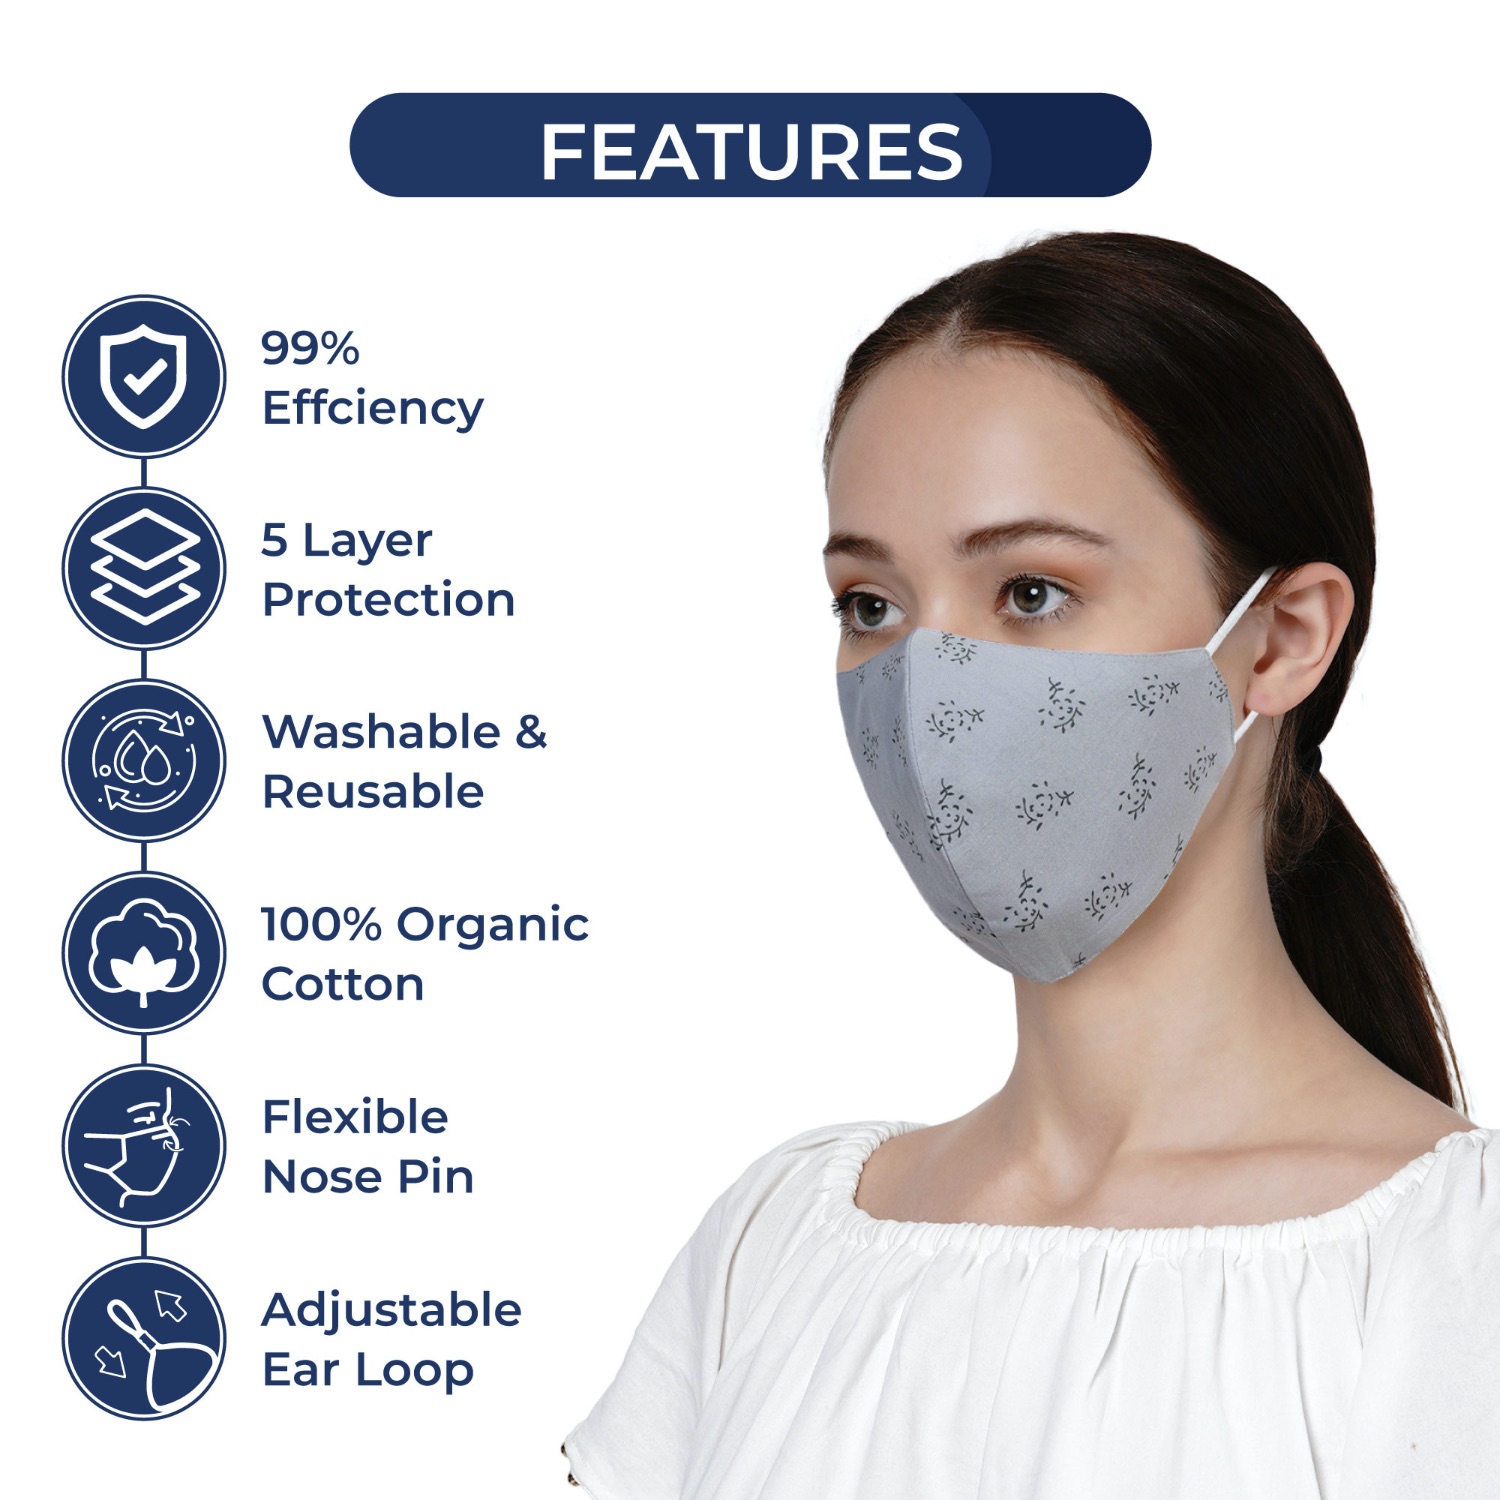 Buy KAWACH Mask by IIT Delhi Startup Reusable and Washable Protective Cotton Face Mask 